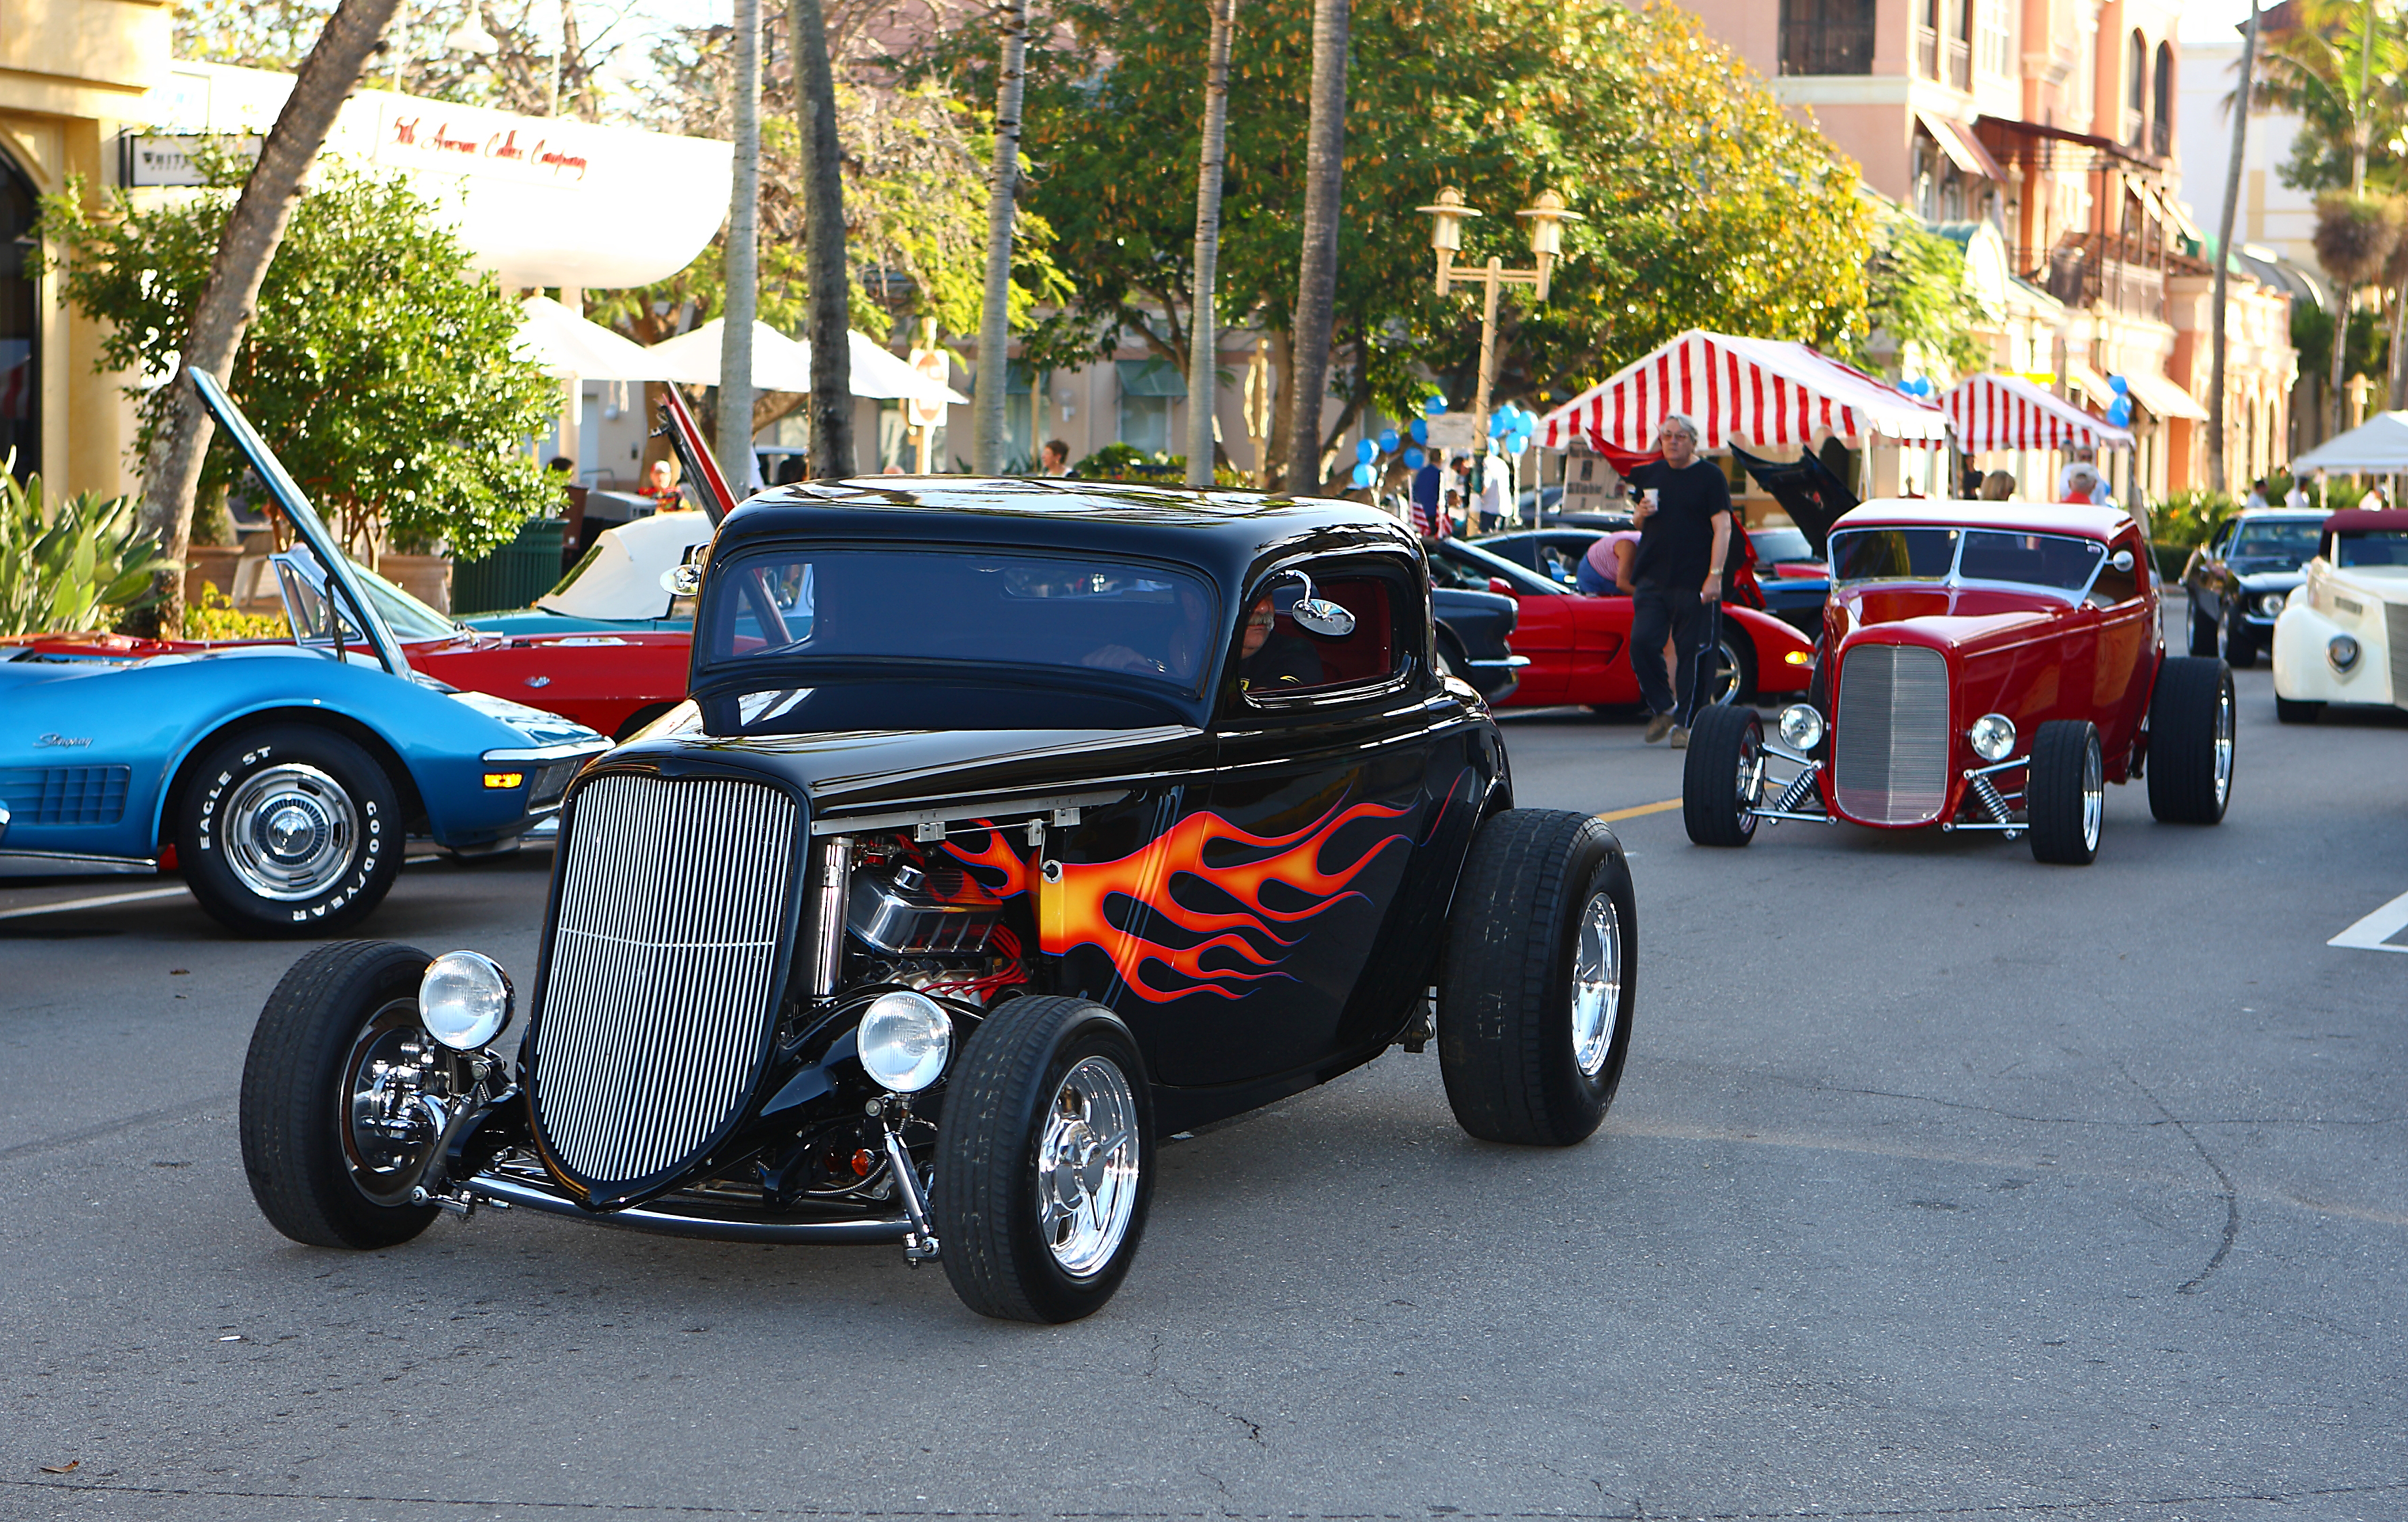 Hot Rod Cars What Is It, Hot rods, classic American cars, engines modified,...